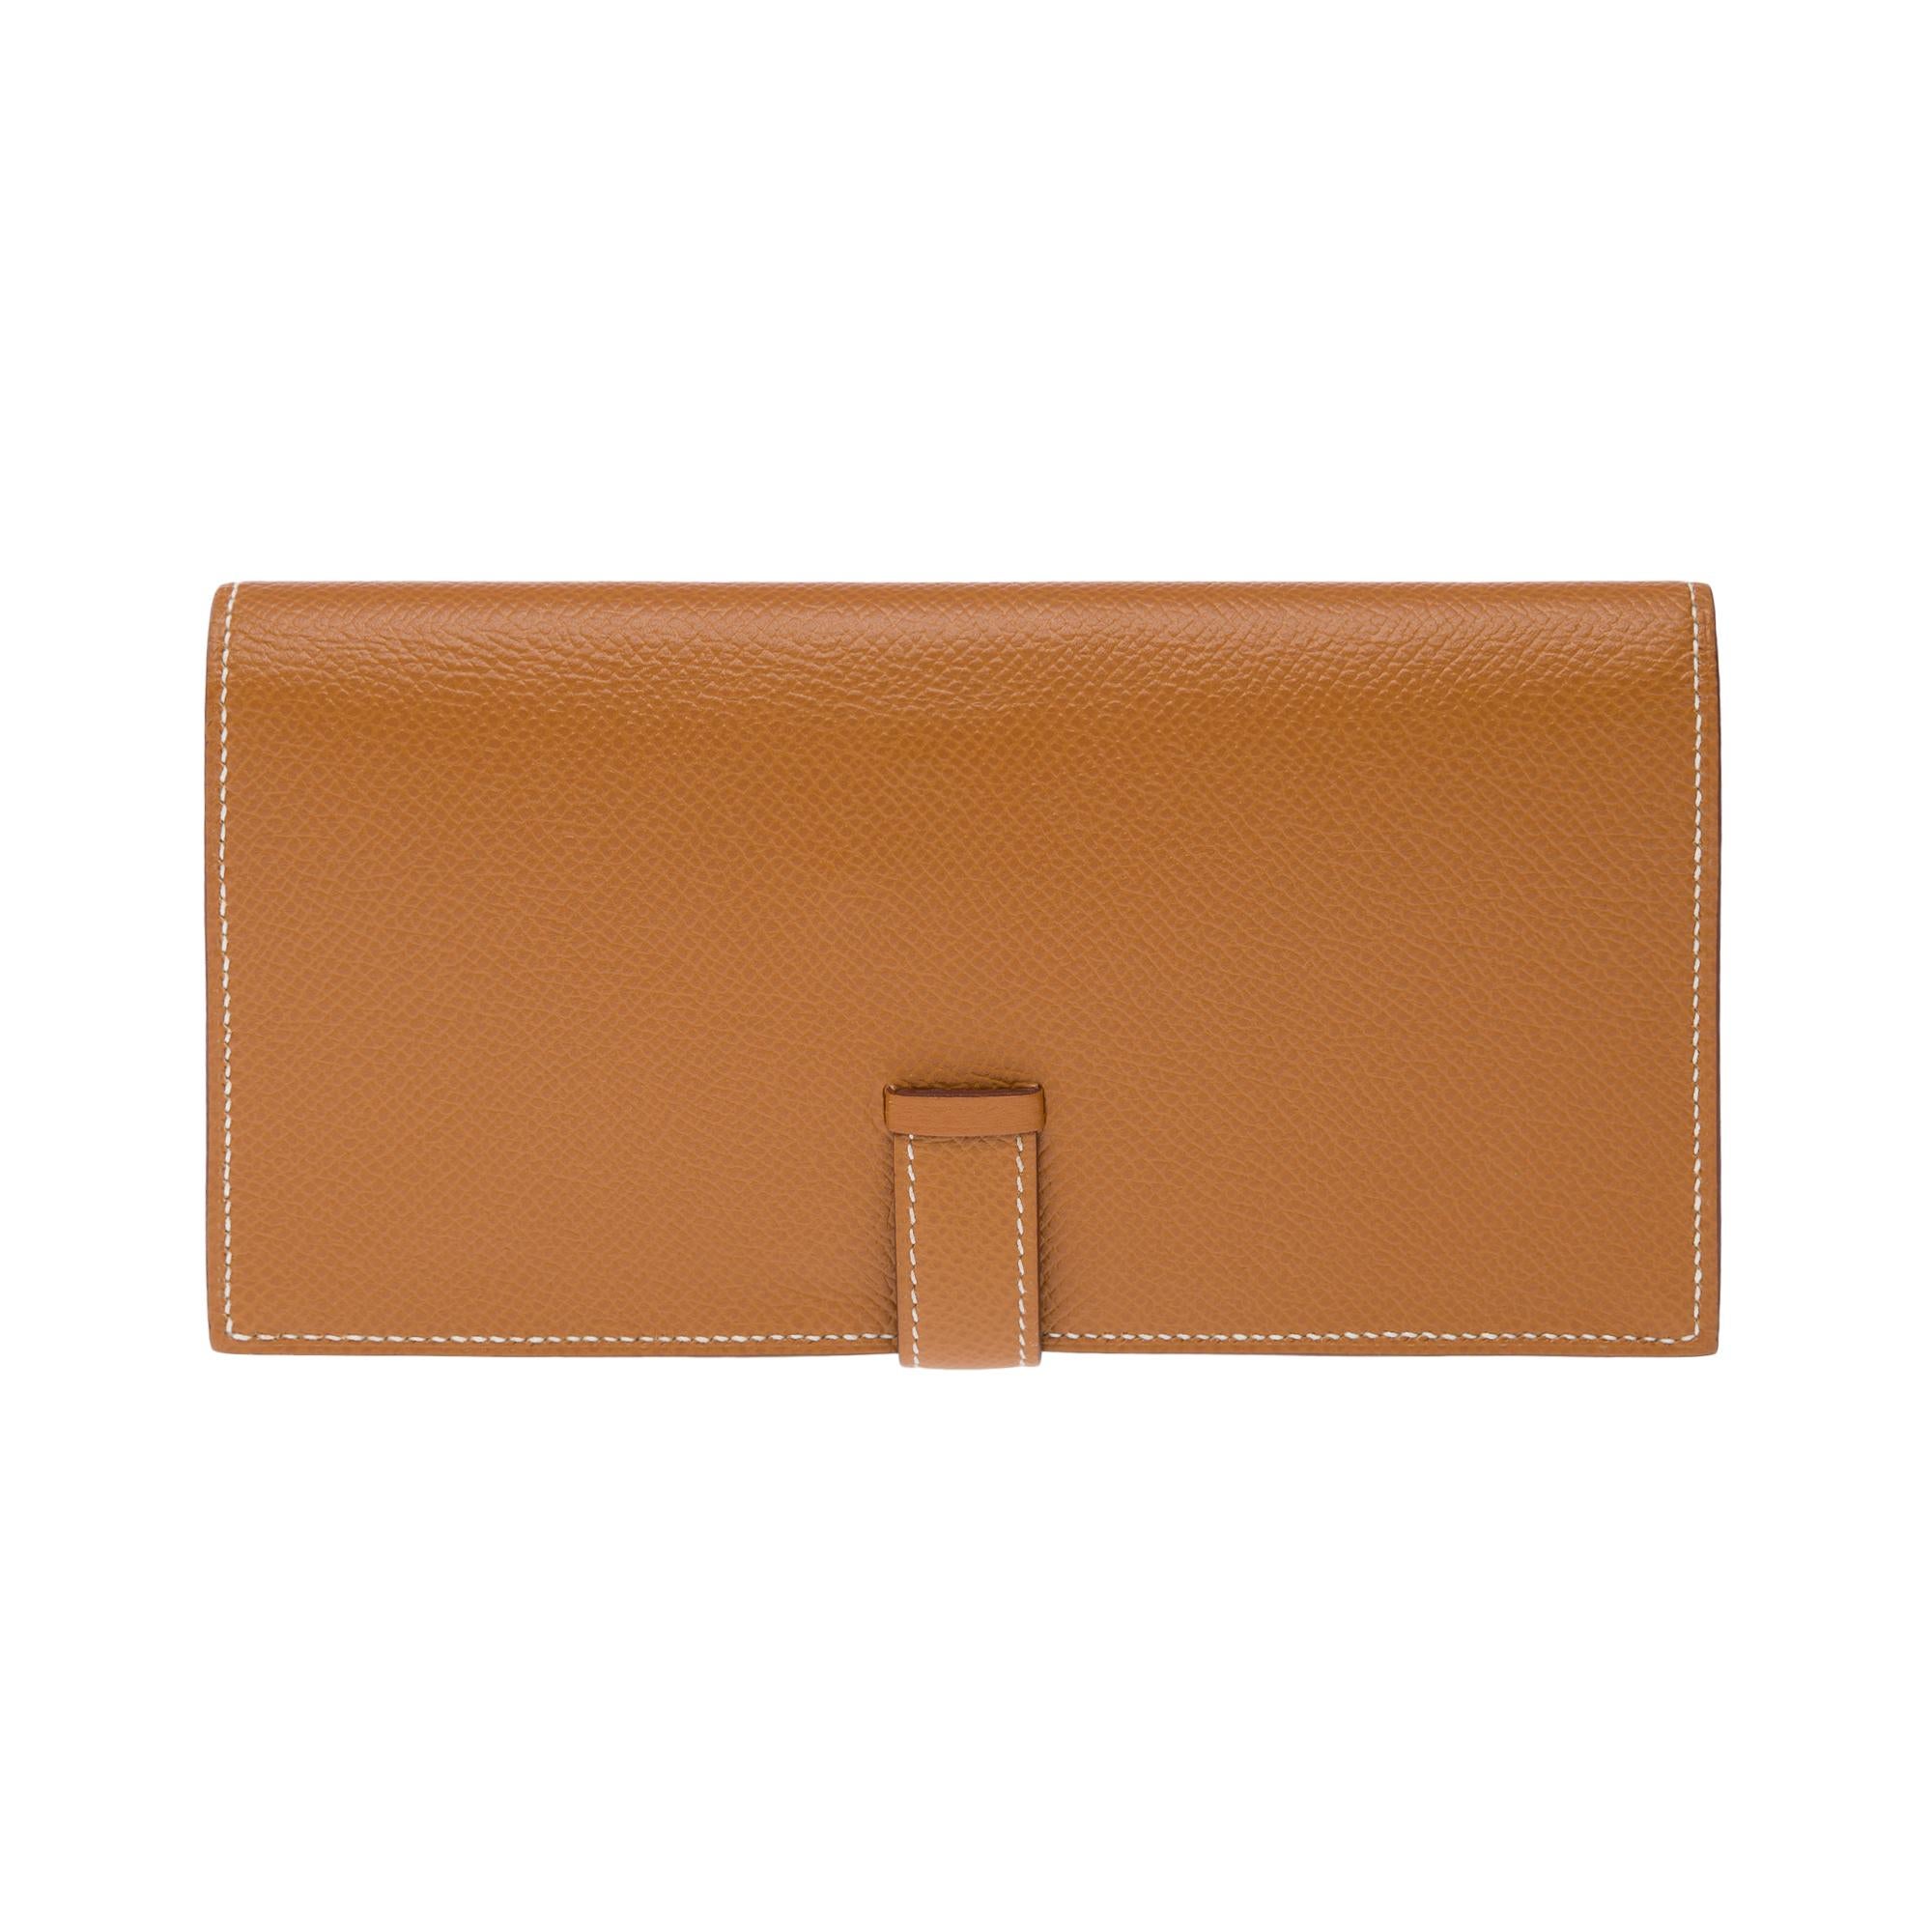 Brown Brand new Hermès Béarn Wallet in Gold Epsom leather, SHW